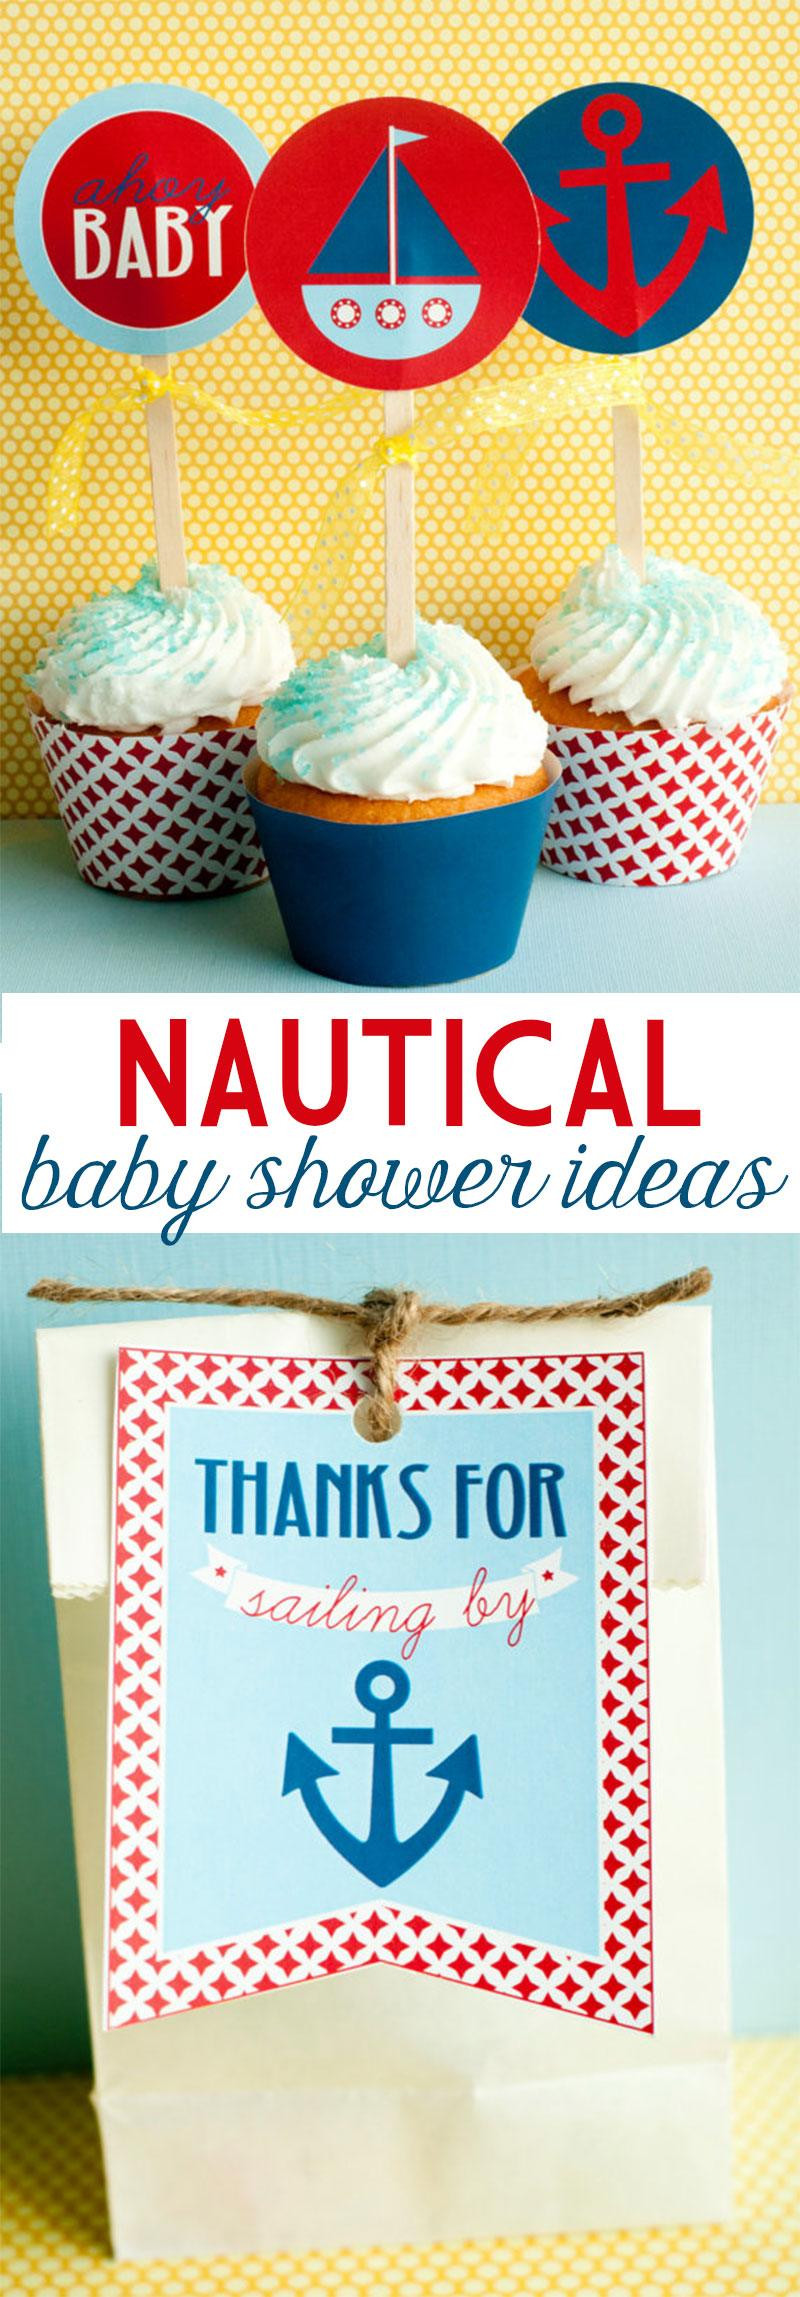 Nautical Baby Shower Gifts
 Nautical Baby Shower Ideas & Printables